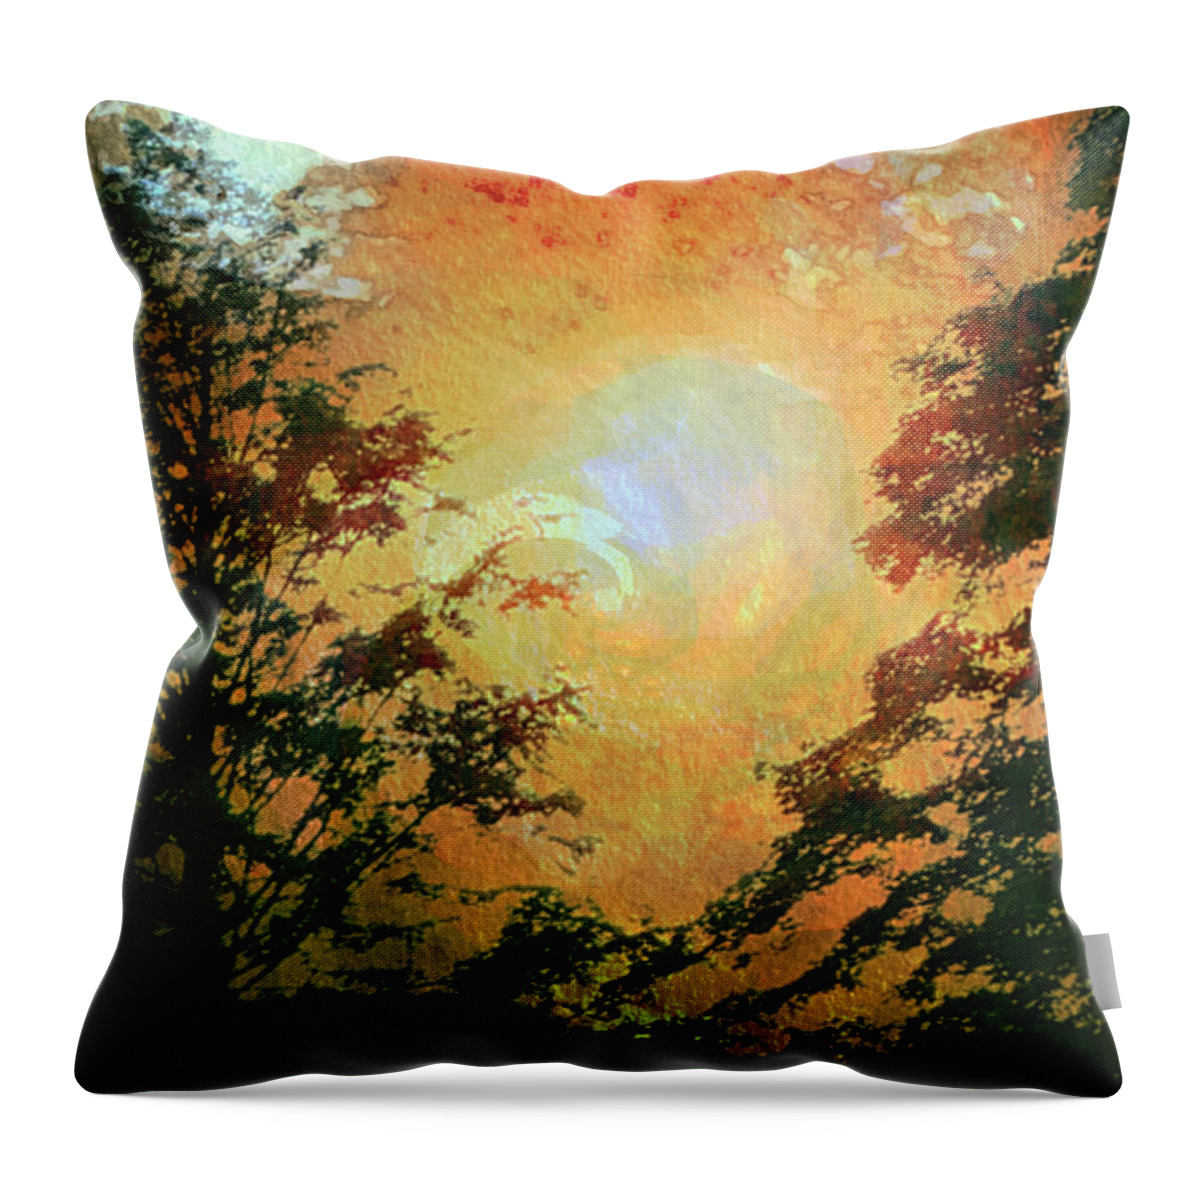 Tree Throw Pillow featuring the photograph Sunset Vortex by Carol Whaley Addassi